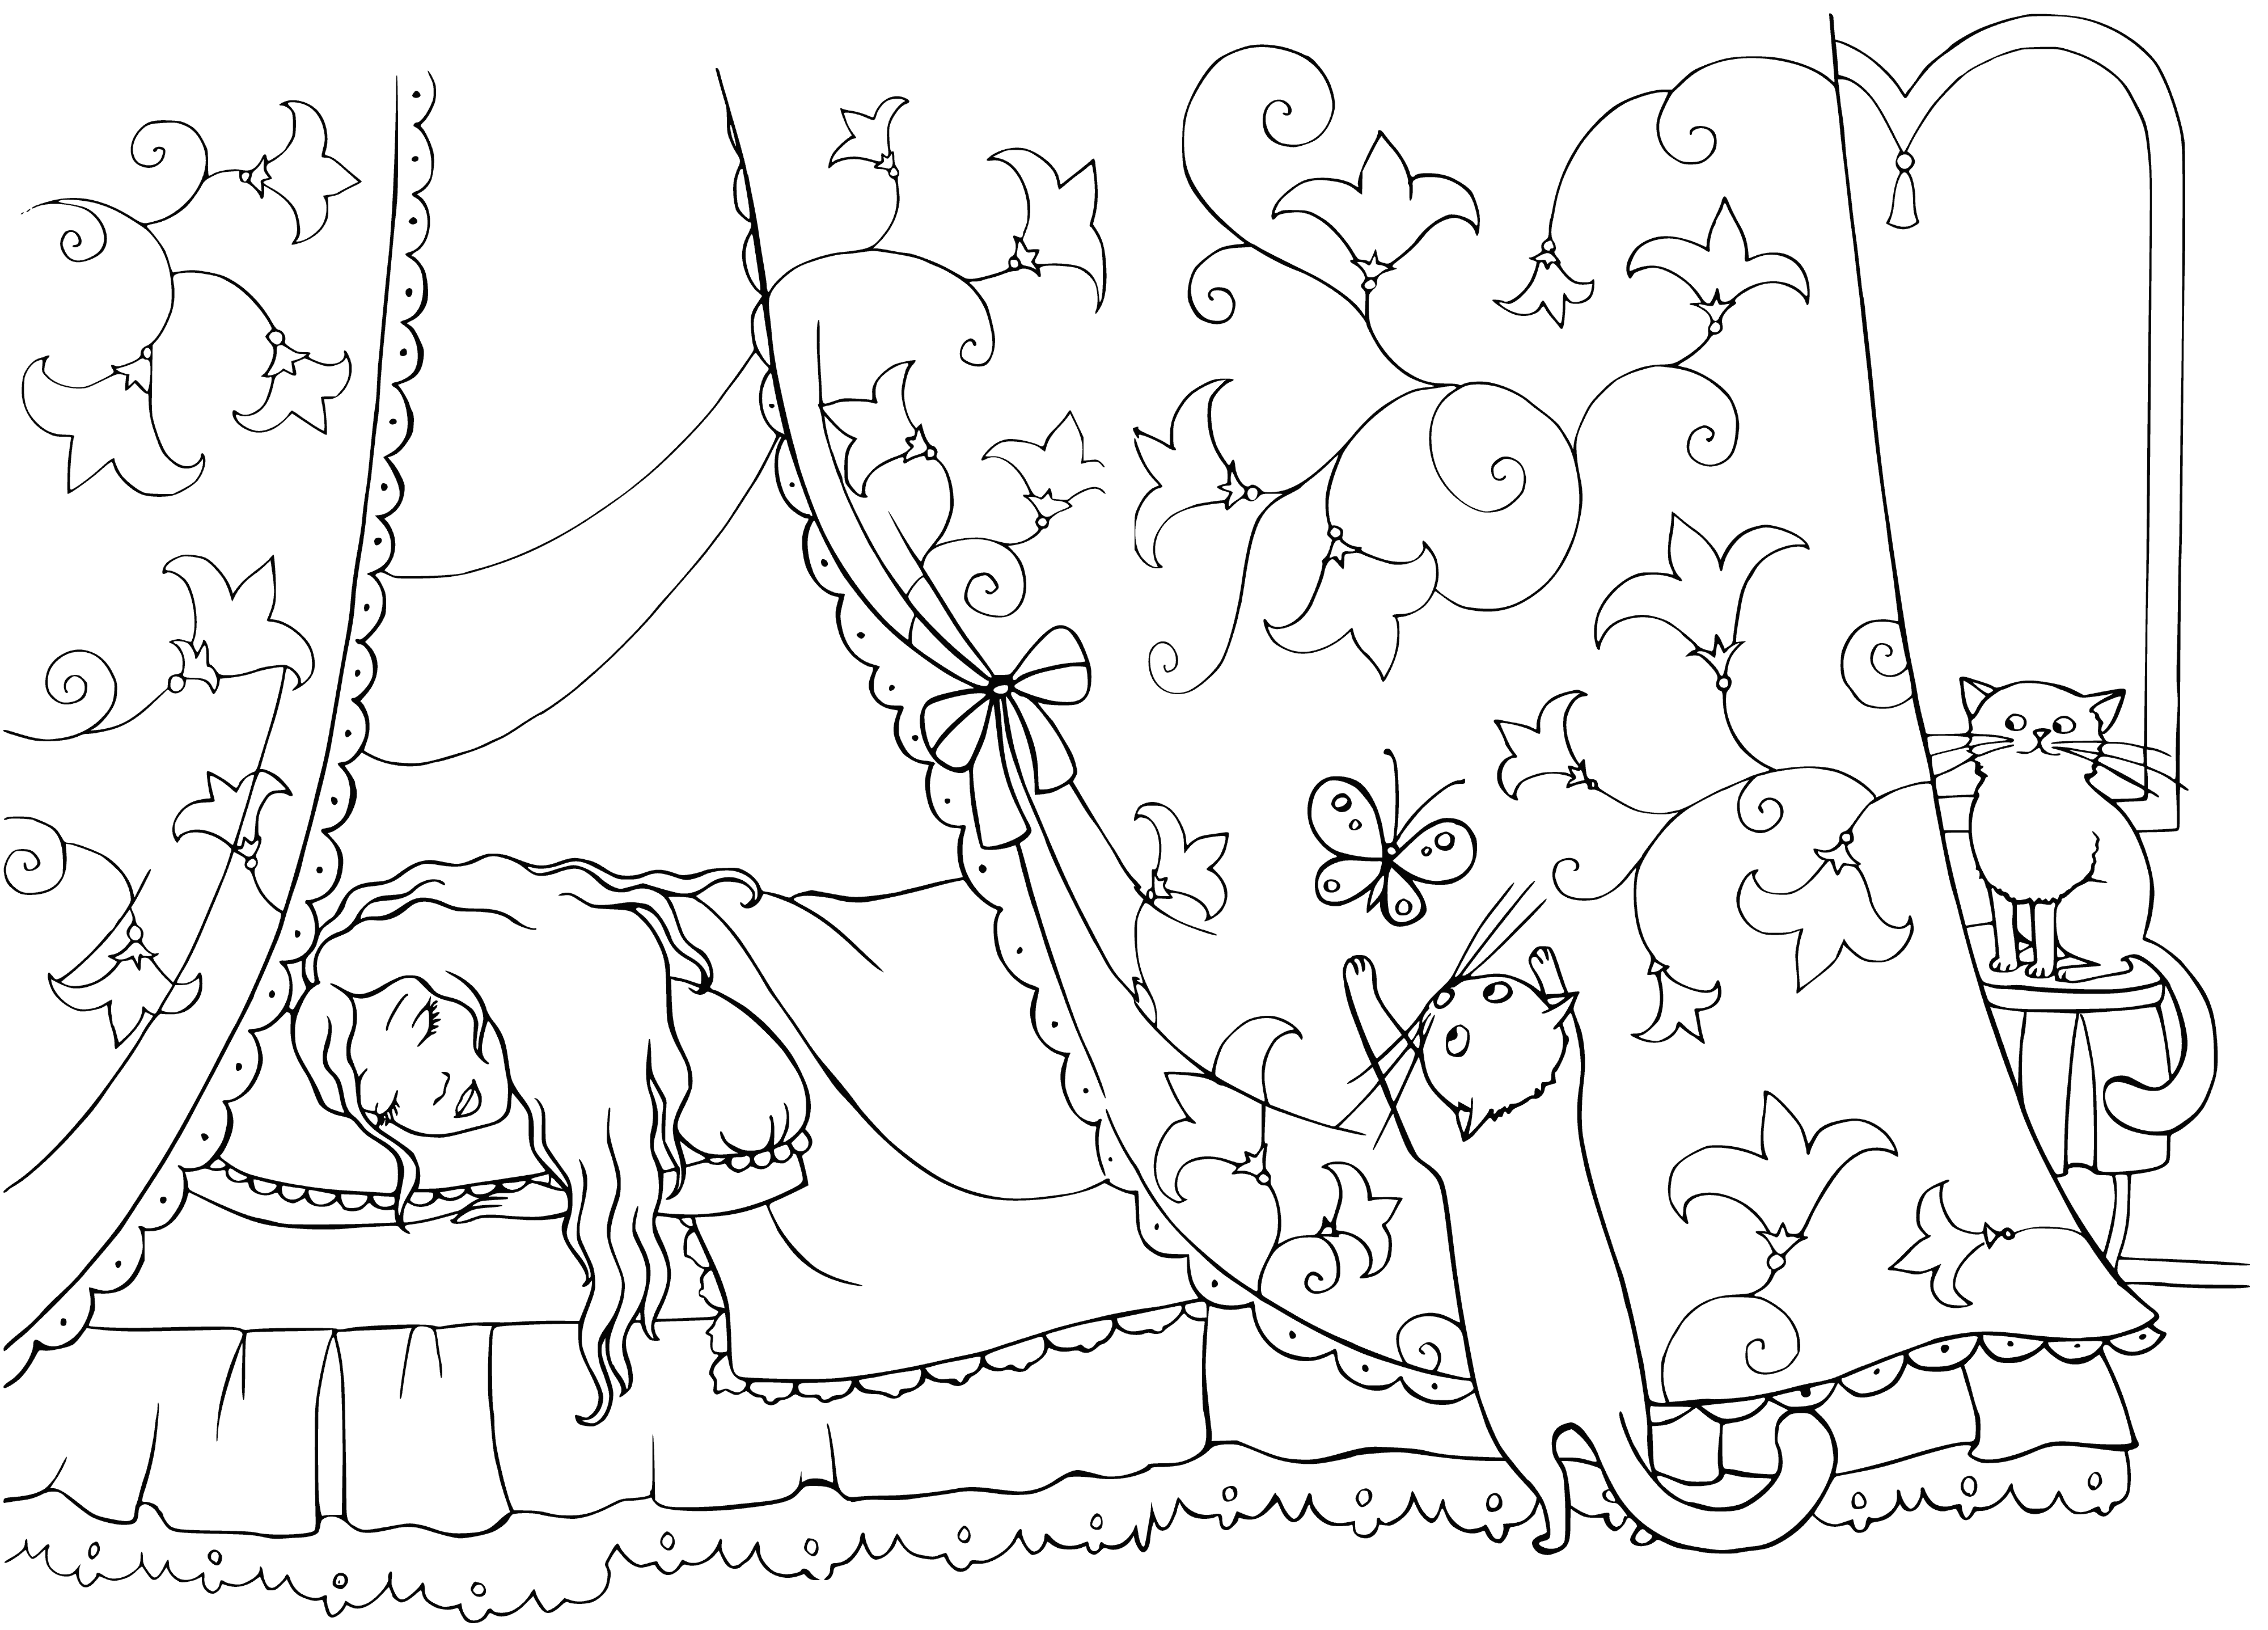 coloring page: Large castle with many towers in kingdom center made of pink & white stones. Trees, flowers, thick grass, butterflies & birds flying, deep blue sky.